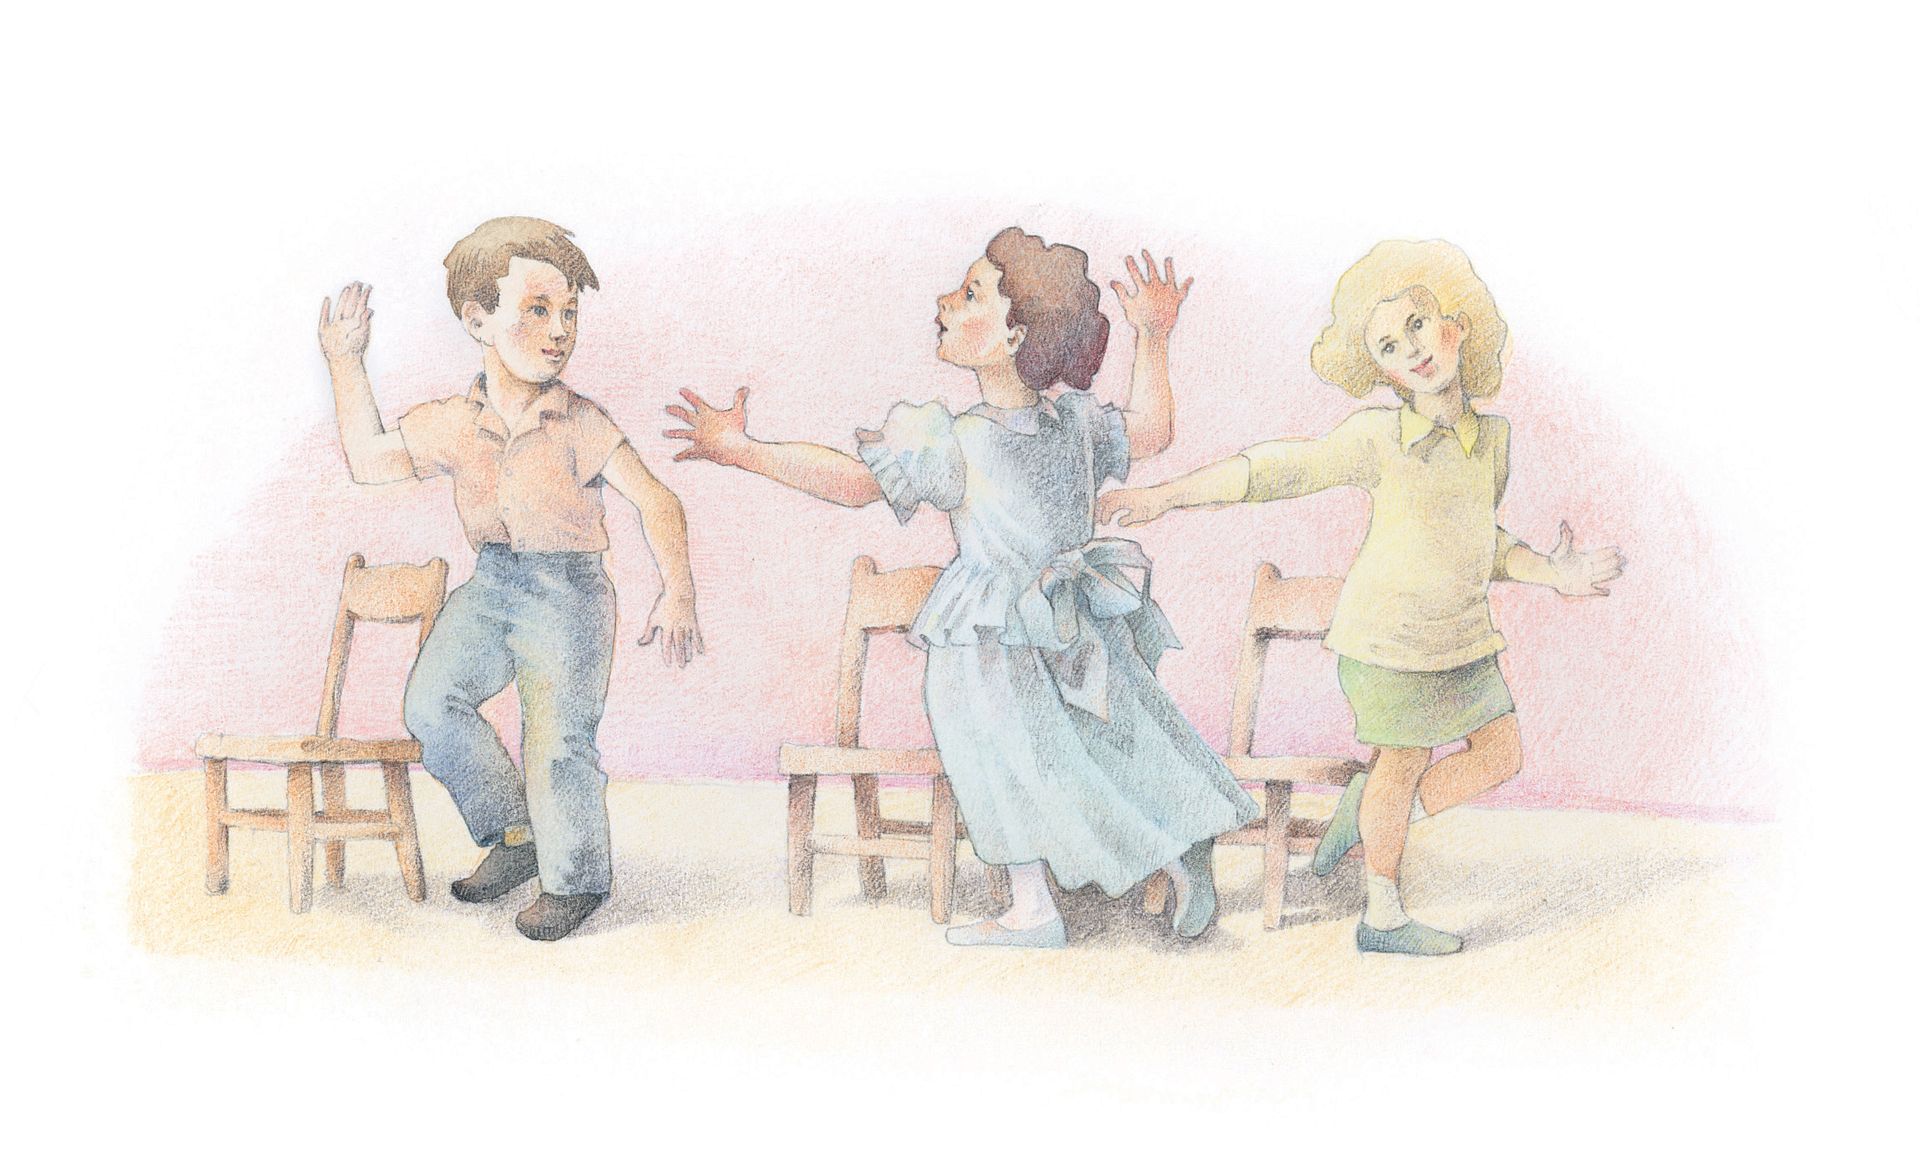 Three children standing next to their chairs while singing a song. From the Children’s Songbook, page 278, “Stand Up”; watercolor illustration by Richard Hull.